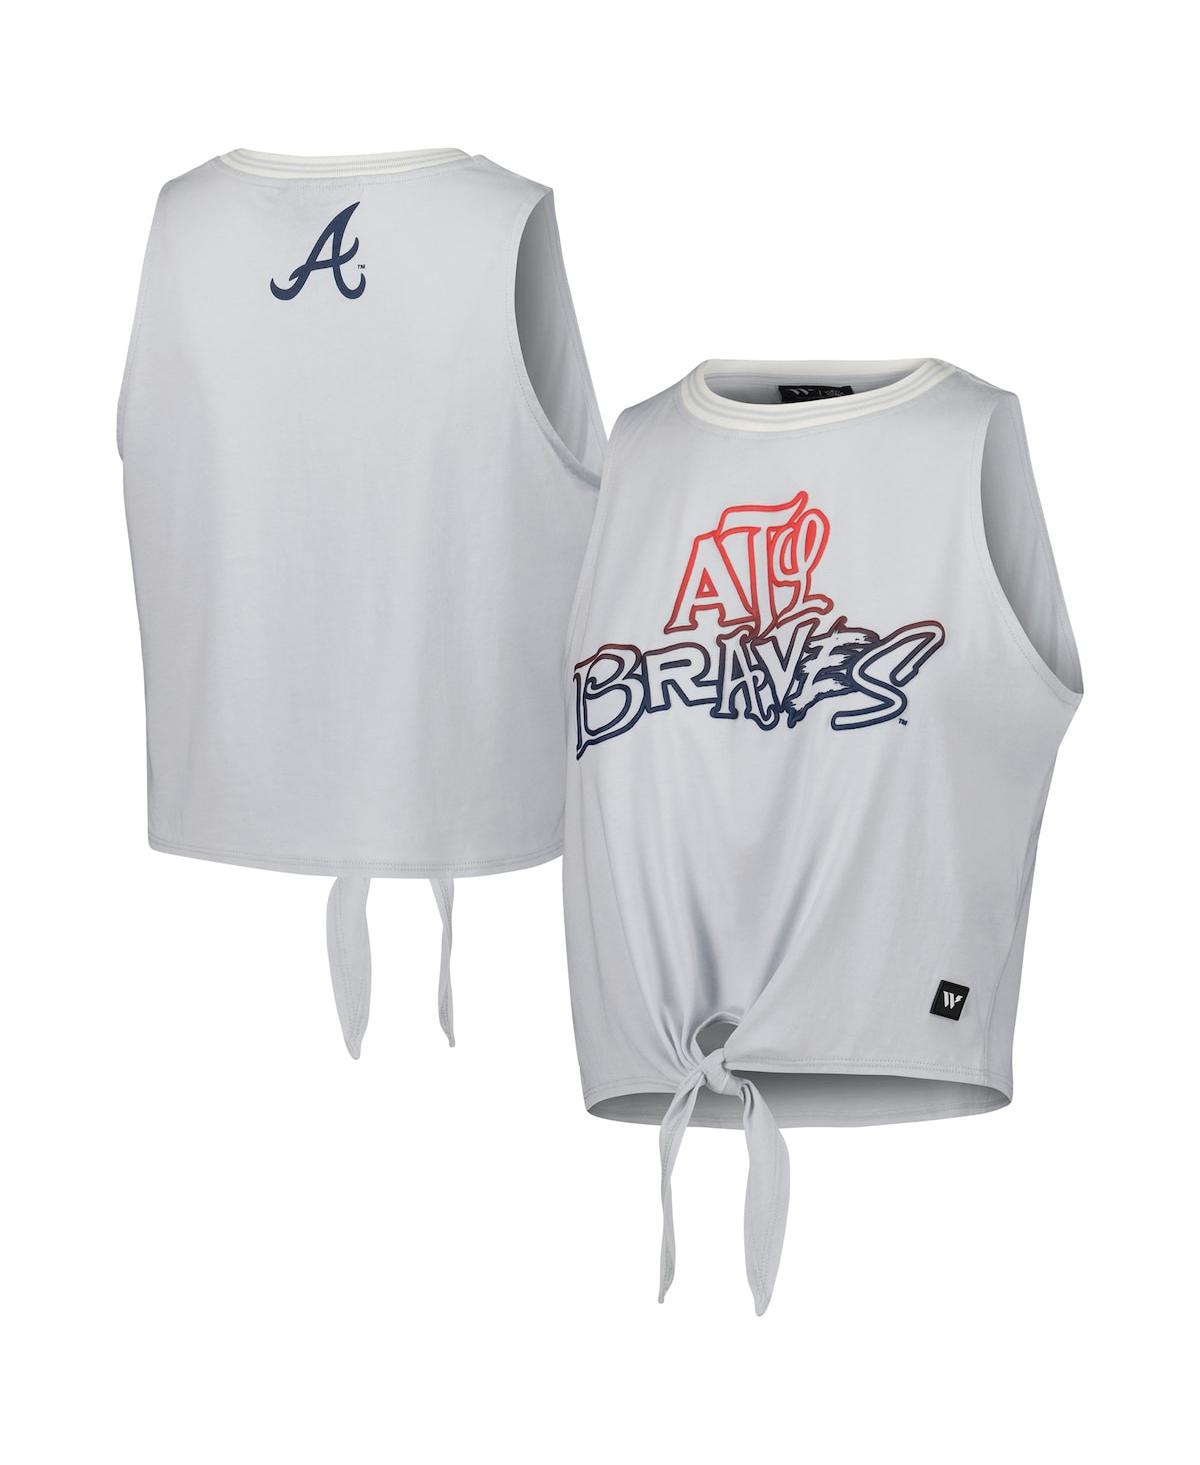 Women's The Wild Collective White Atlanta Braves Twisted Tie Front Tank Top Size: Extra Small